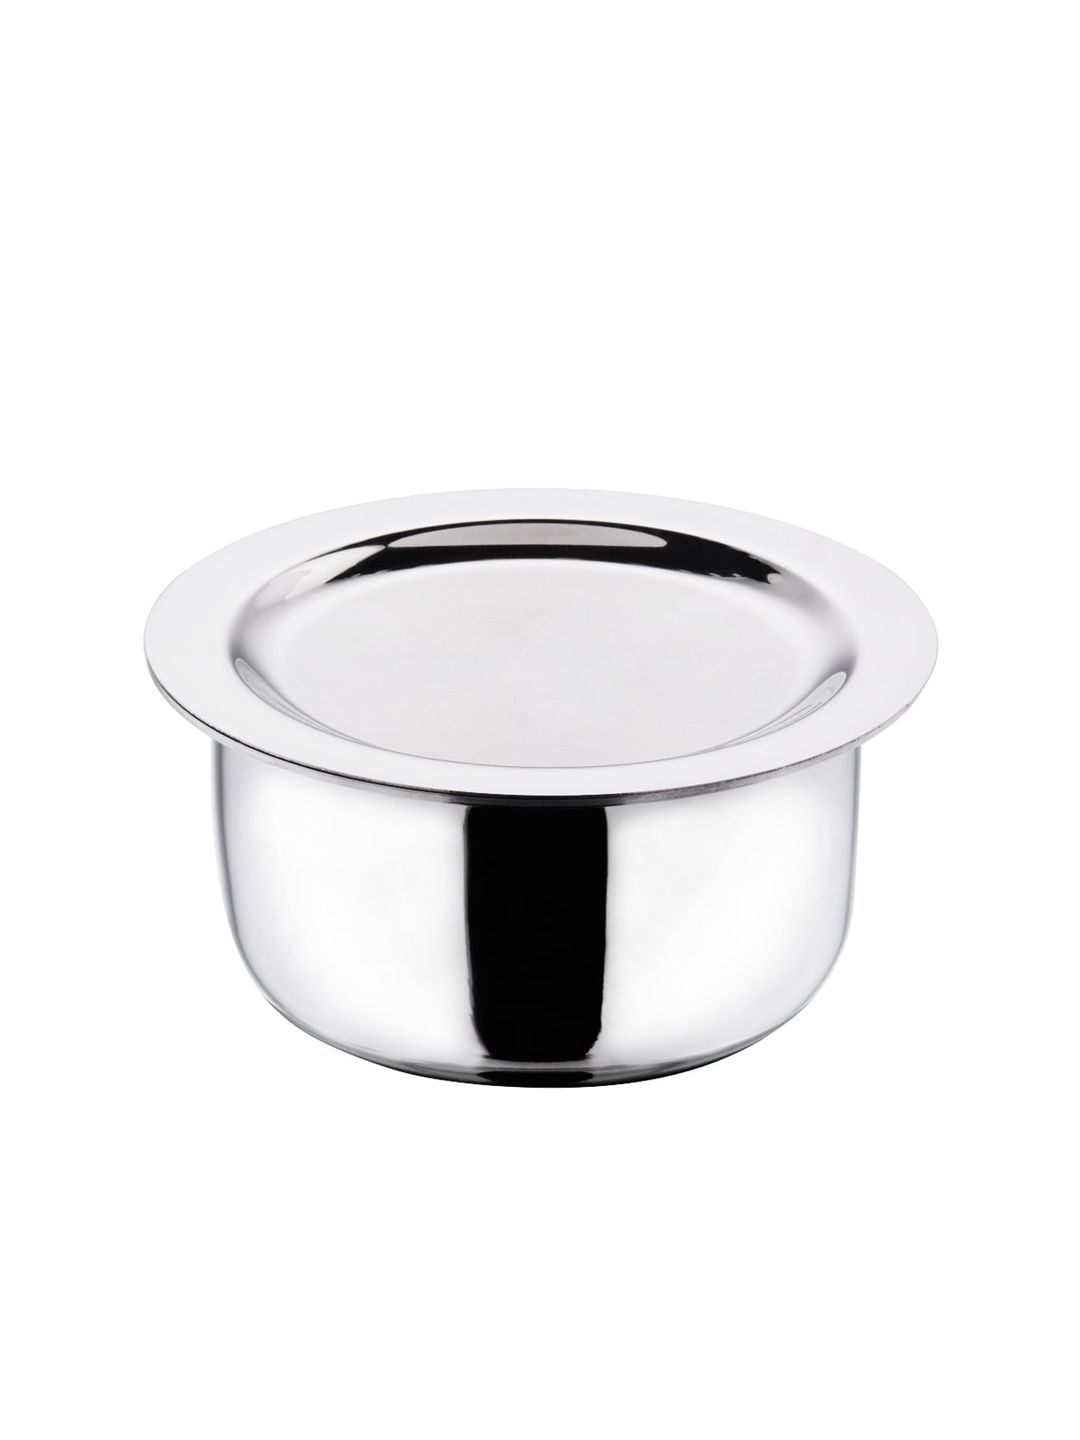 Vinod Silver-Toned Triply Tope With Stainless Steel Lid Price in India